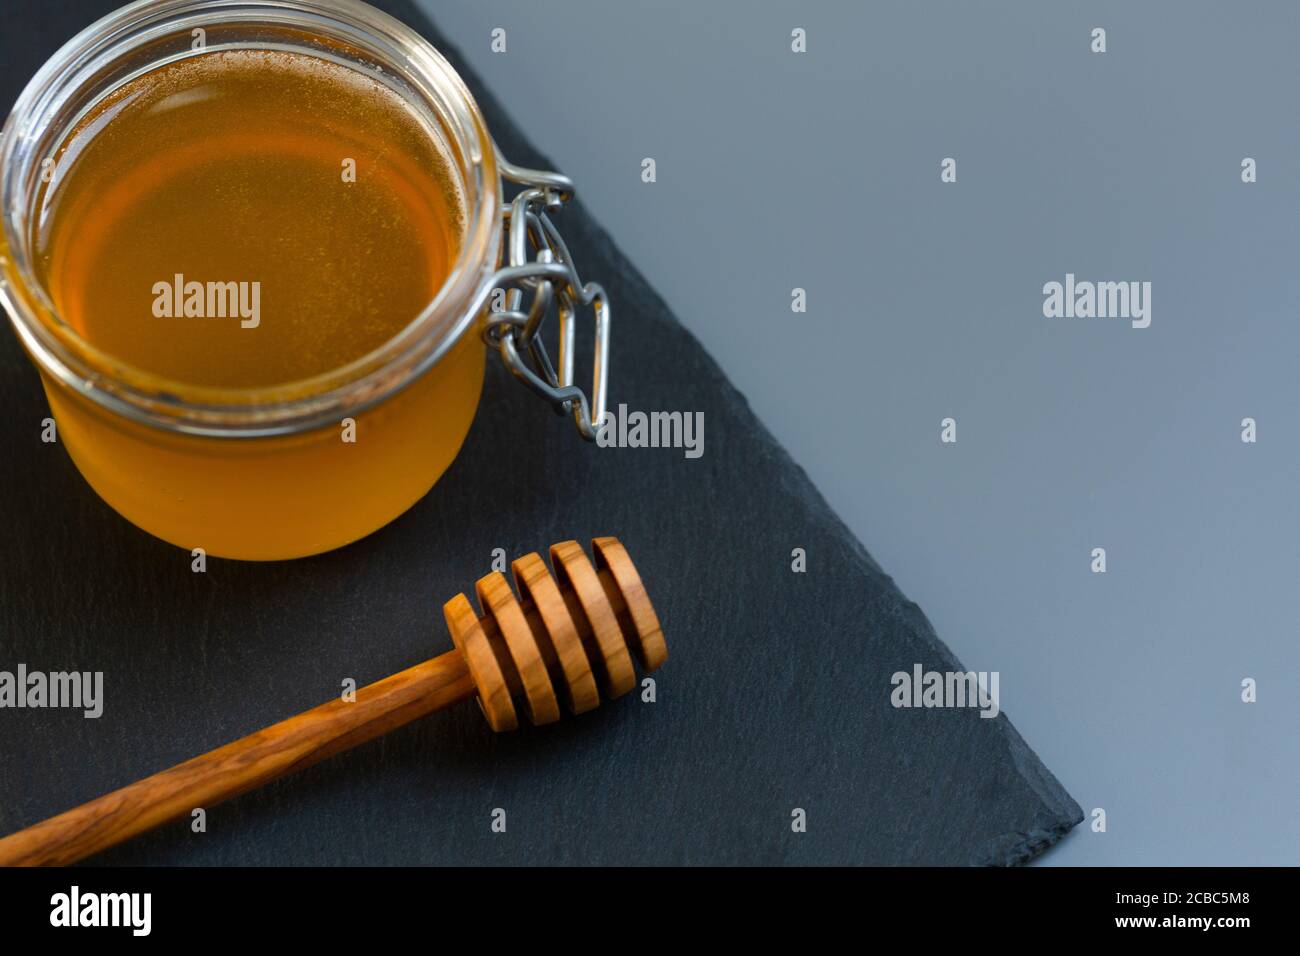 organic honey and rustic bread on a old wooden table. Healthy eating breakfast. Stock Photo